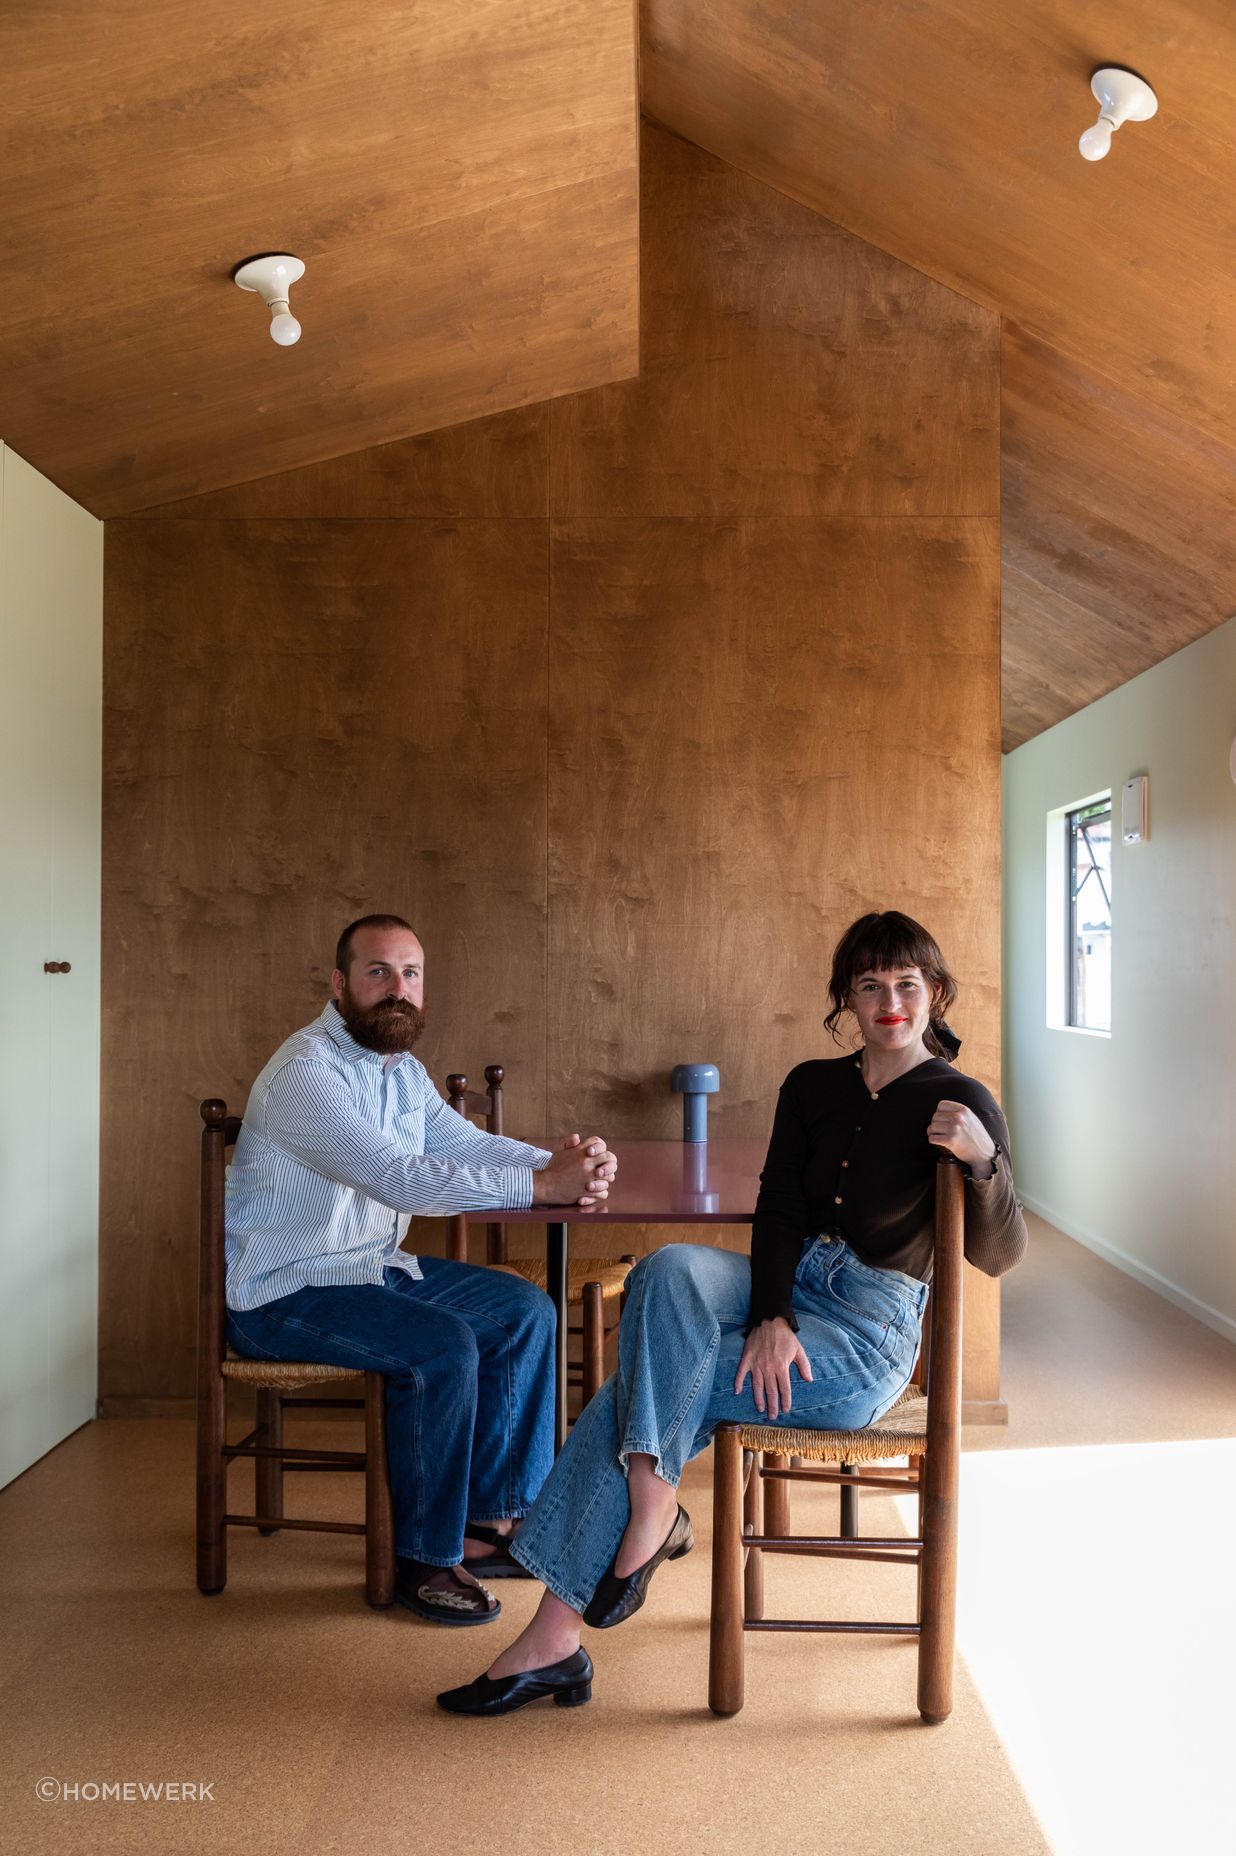 Oliver Starr (left) and Sammy Scapens (right) sit at the table in a completed Homewerk cabin.